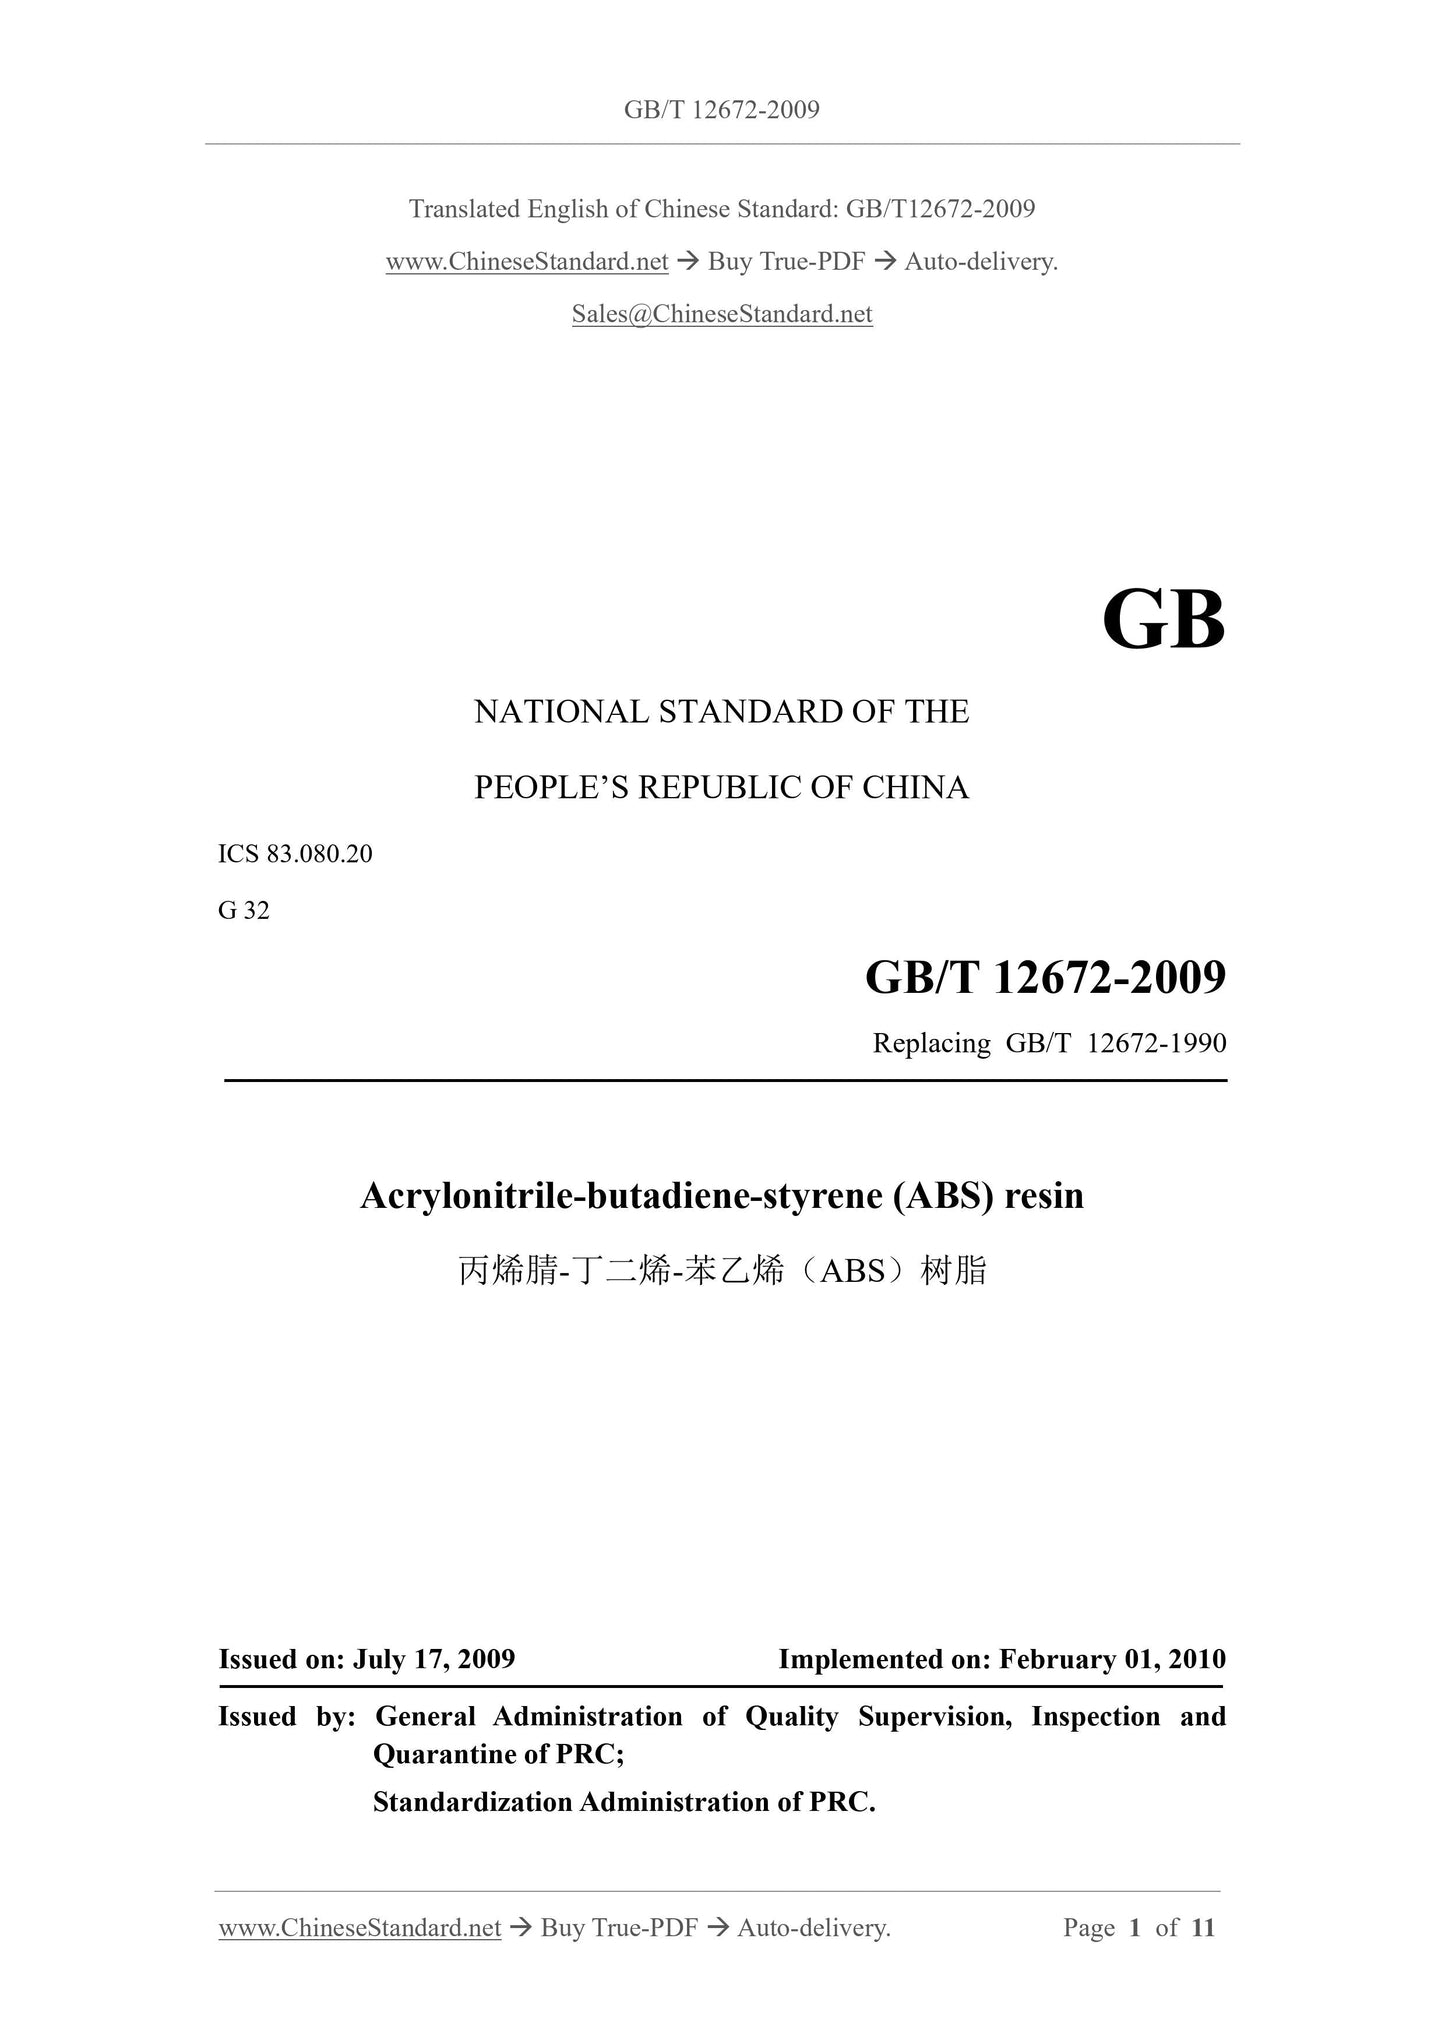 GB/T 12672-2009 Page 1